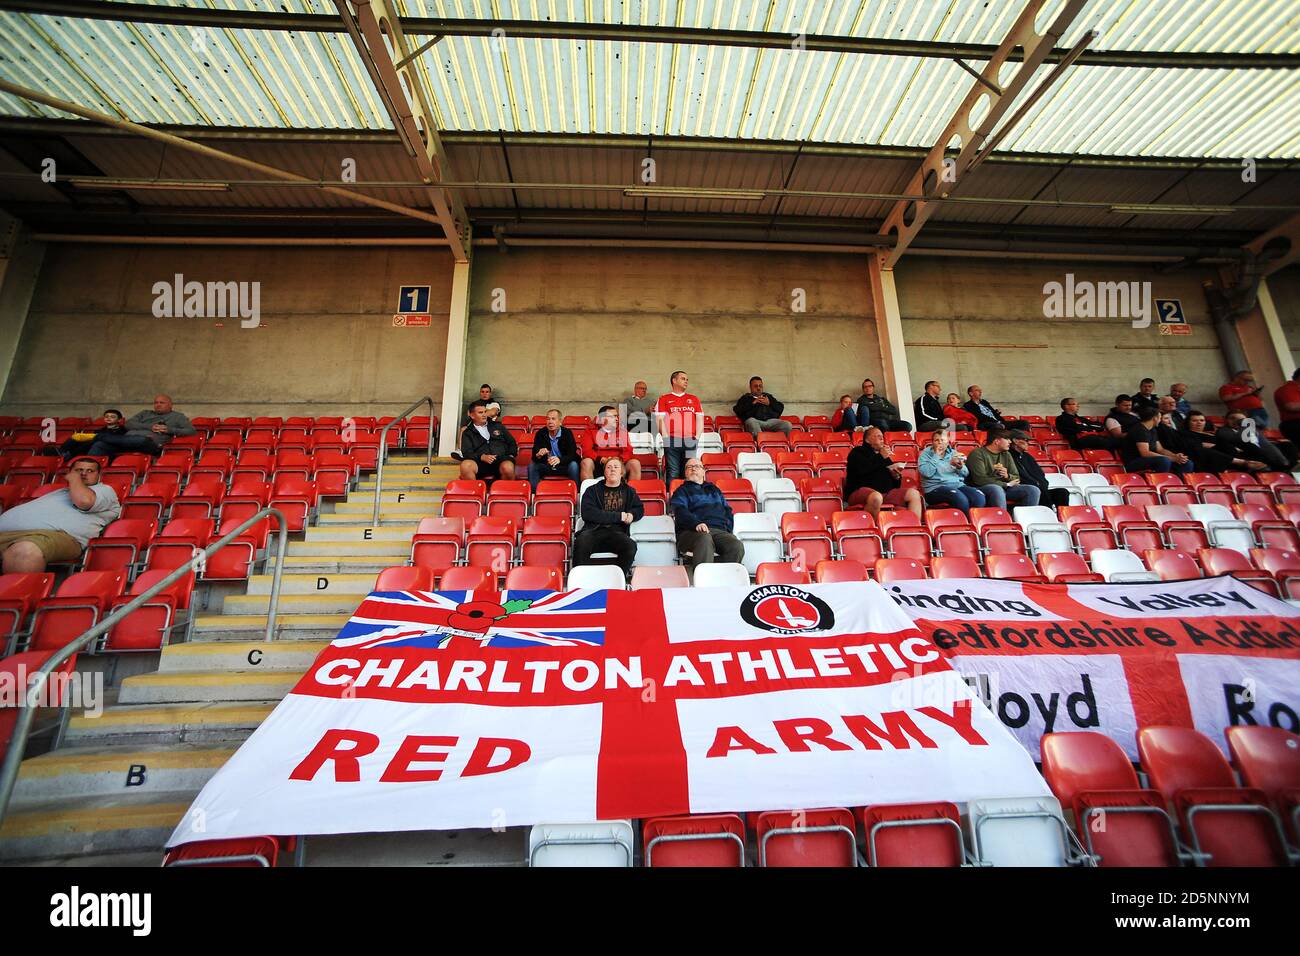 Charlton Athletic fans in the stands at the LCI Rail Stadium Stock Photo